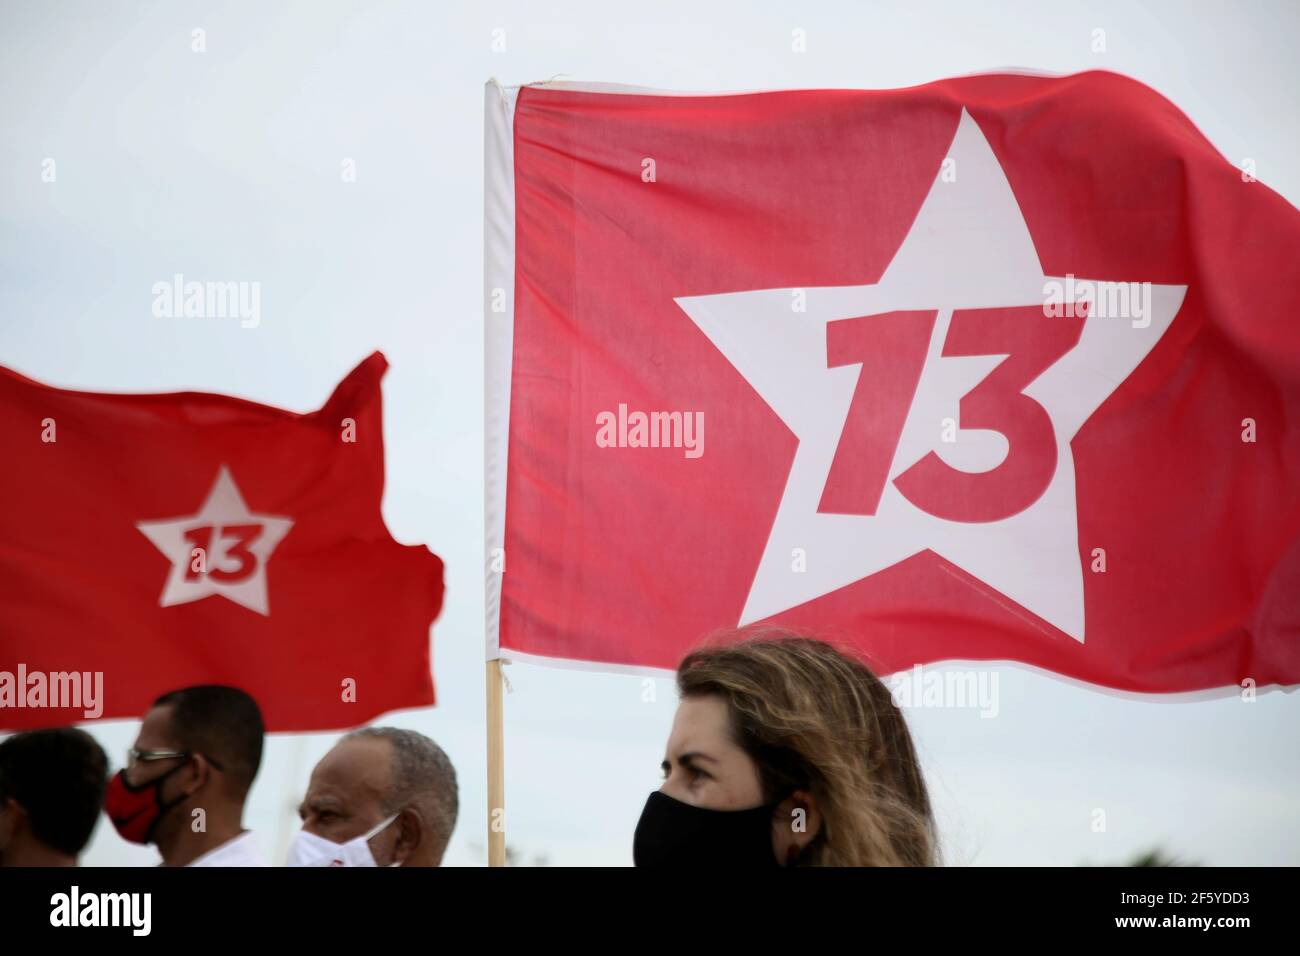 salvador, bahia, brazil - january 22, 2021: militant of Partido dos Trabalhadores - PT, is seen holding the flag of coalition 13 during a demonstratio Stock Photo